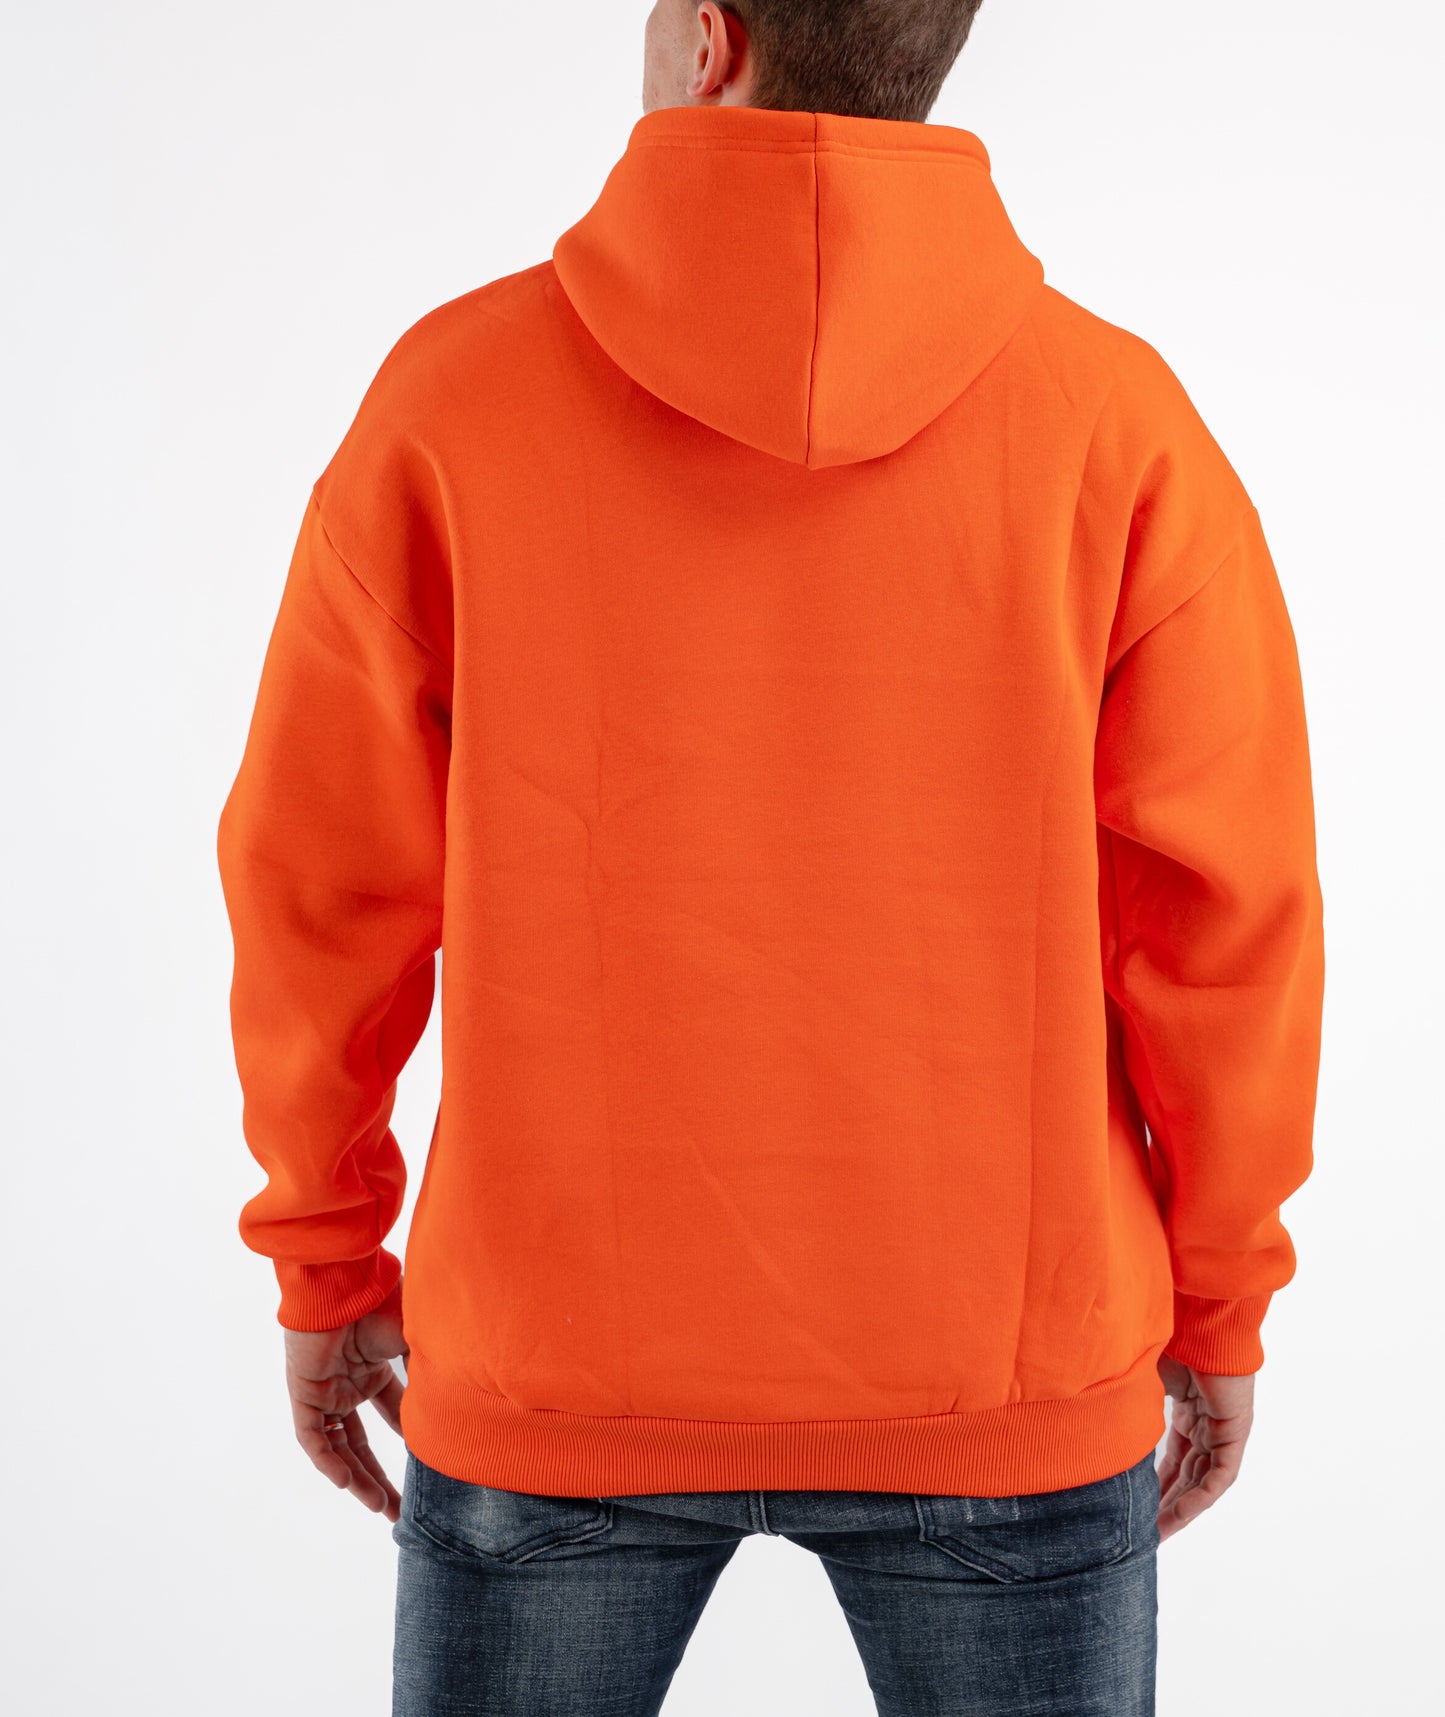 CORAL ORANGE OVER-SIZED HOODIE